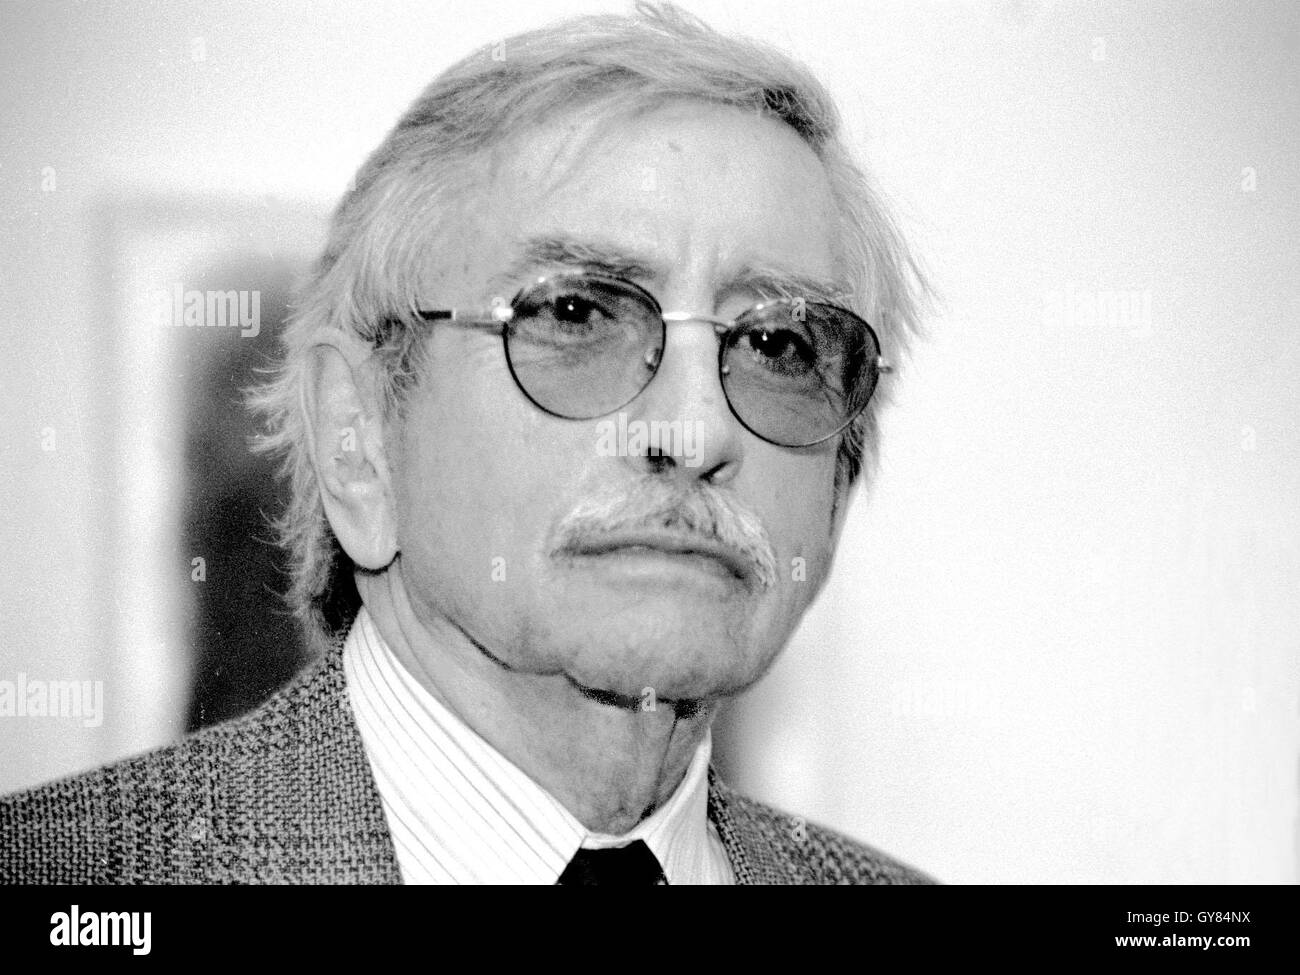 FilePix: Edward Albee American playwright photographed in New York City USA at American Academy of Arts & Letters archival photo 2002. The distinguished member of the American Academy of Arts & Letters was among the most honored of American dramatists. Beyond his Tonys, including one for lifetime achievement, he won three Pulitzer Prizes. His plays probed the savage harrowing sometimes comic depths underlying the facade of American life. & often opened abroad, being more appreciated there than in the US Stock Photo